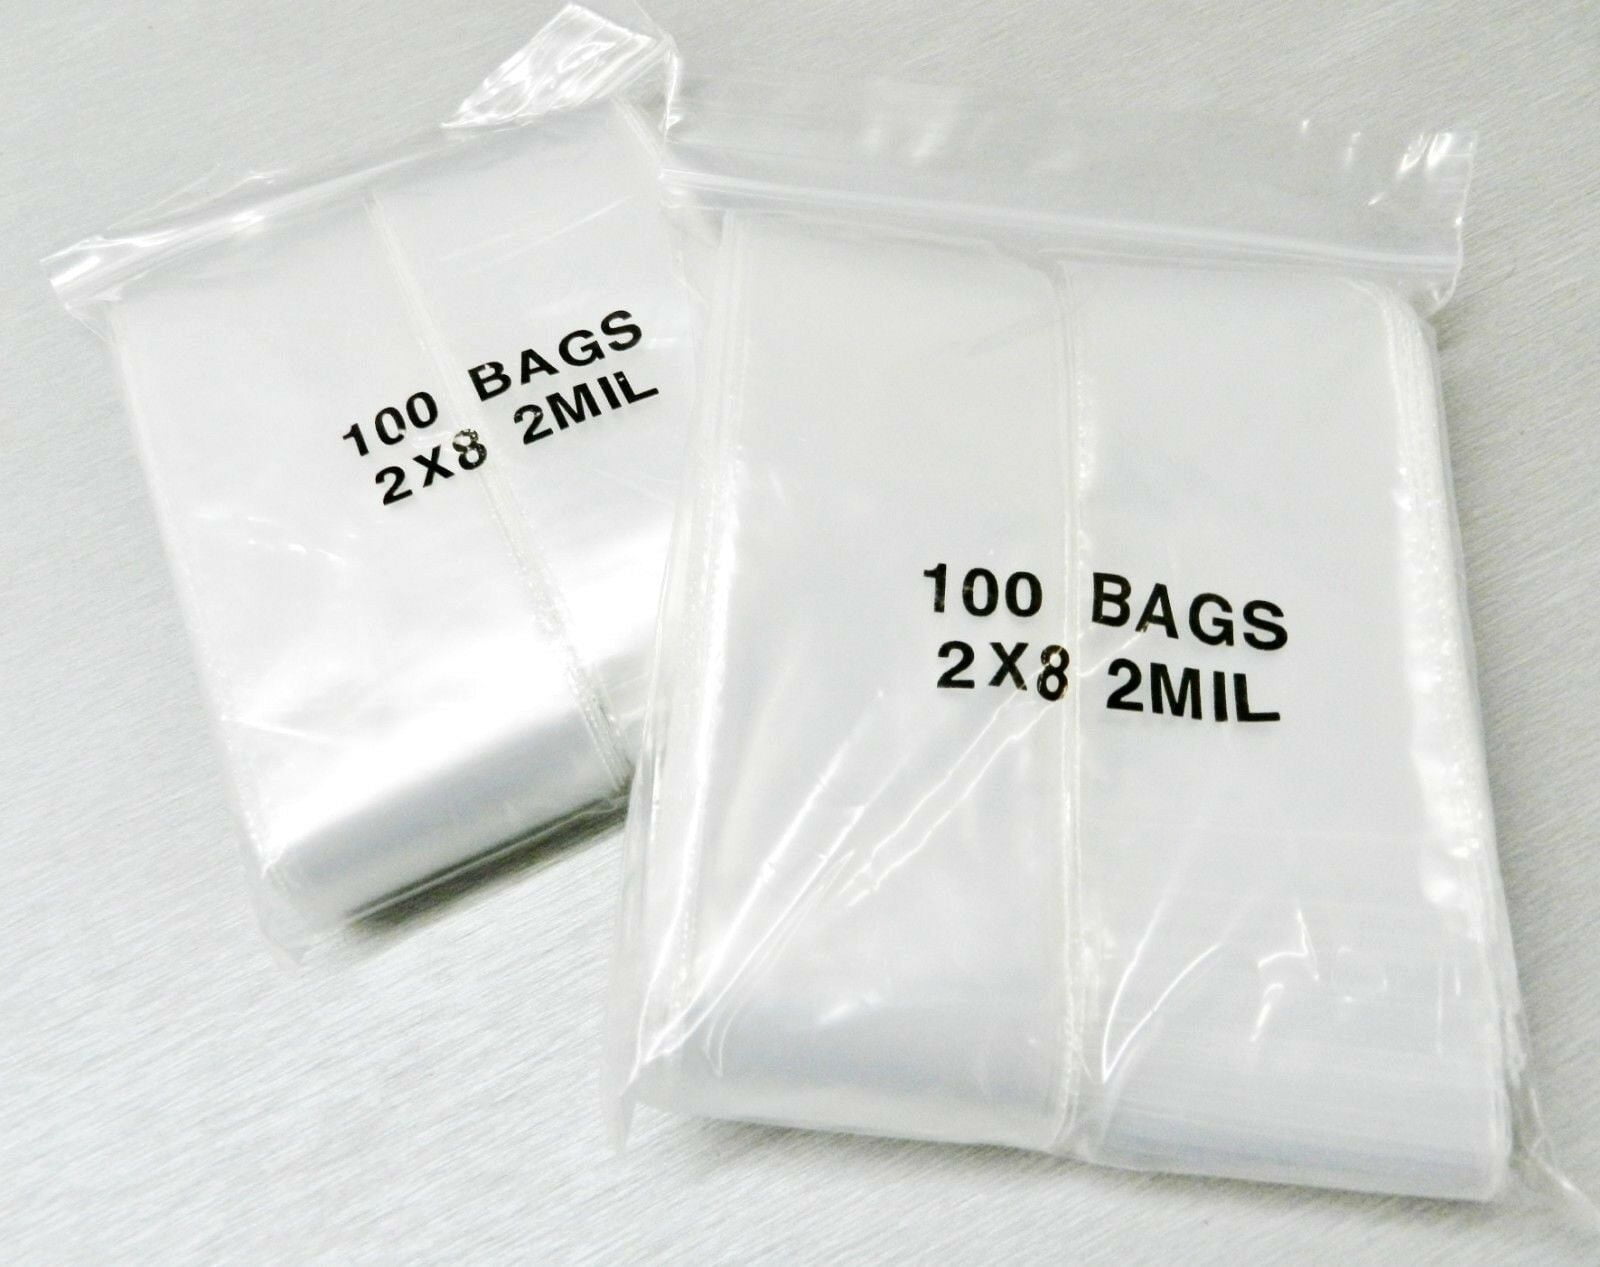 8" Long 2MIL Clair 200 Sacs Refermable Sacs 2" x 8" Squeeze Top Lock 2 Mil 